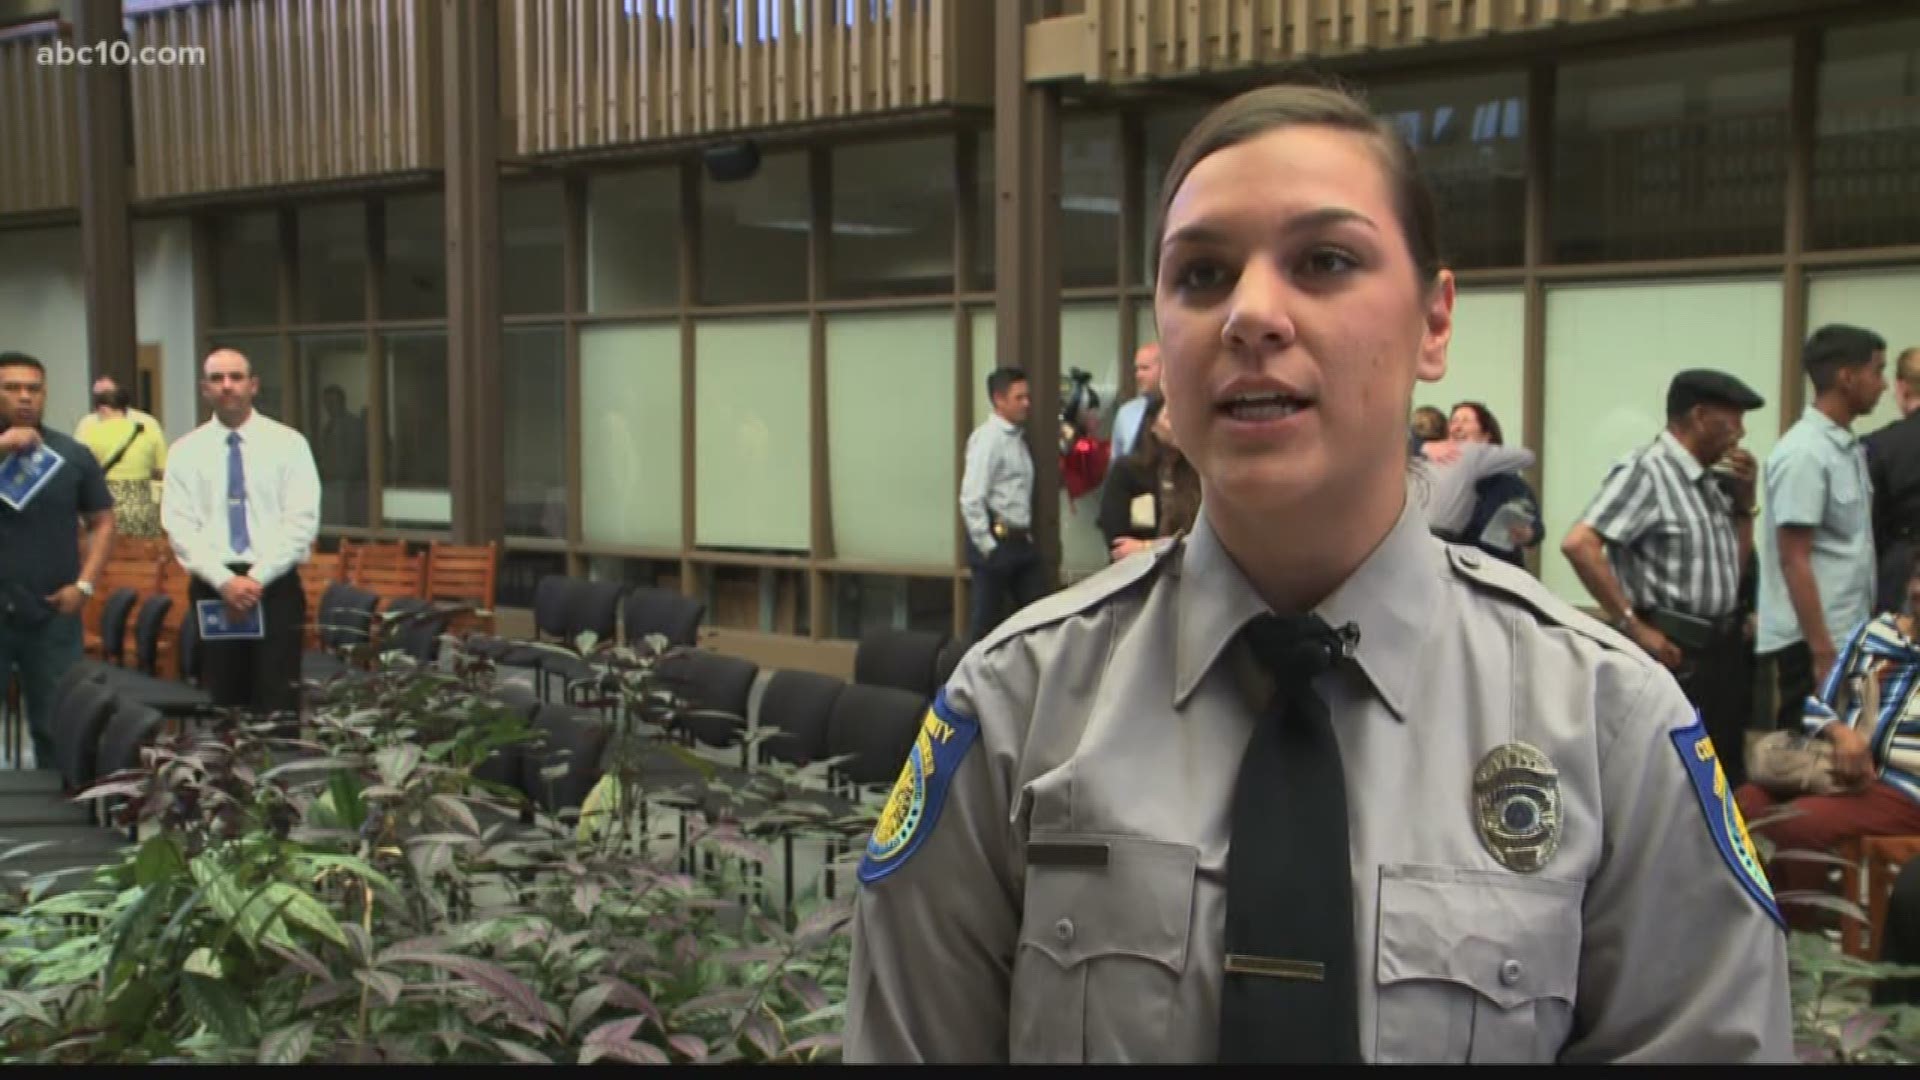 Sacramento Police Department welcomes new community service officers.